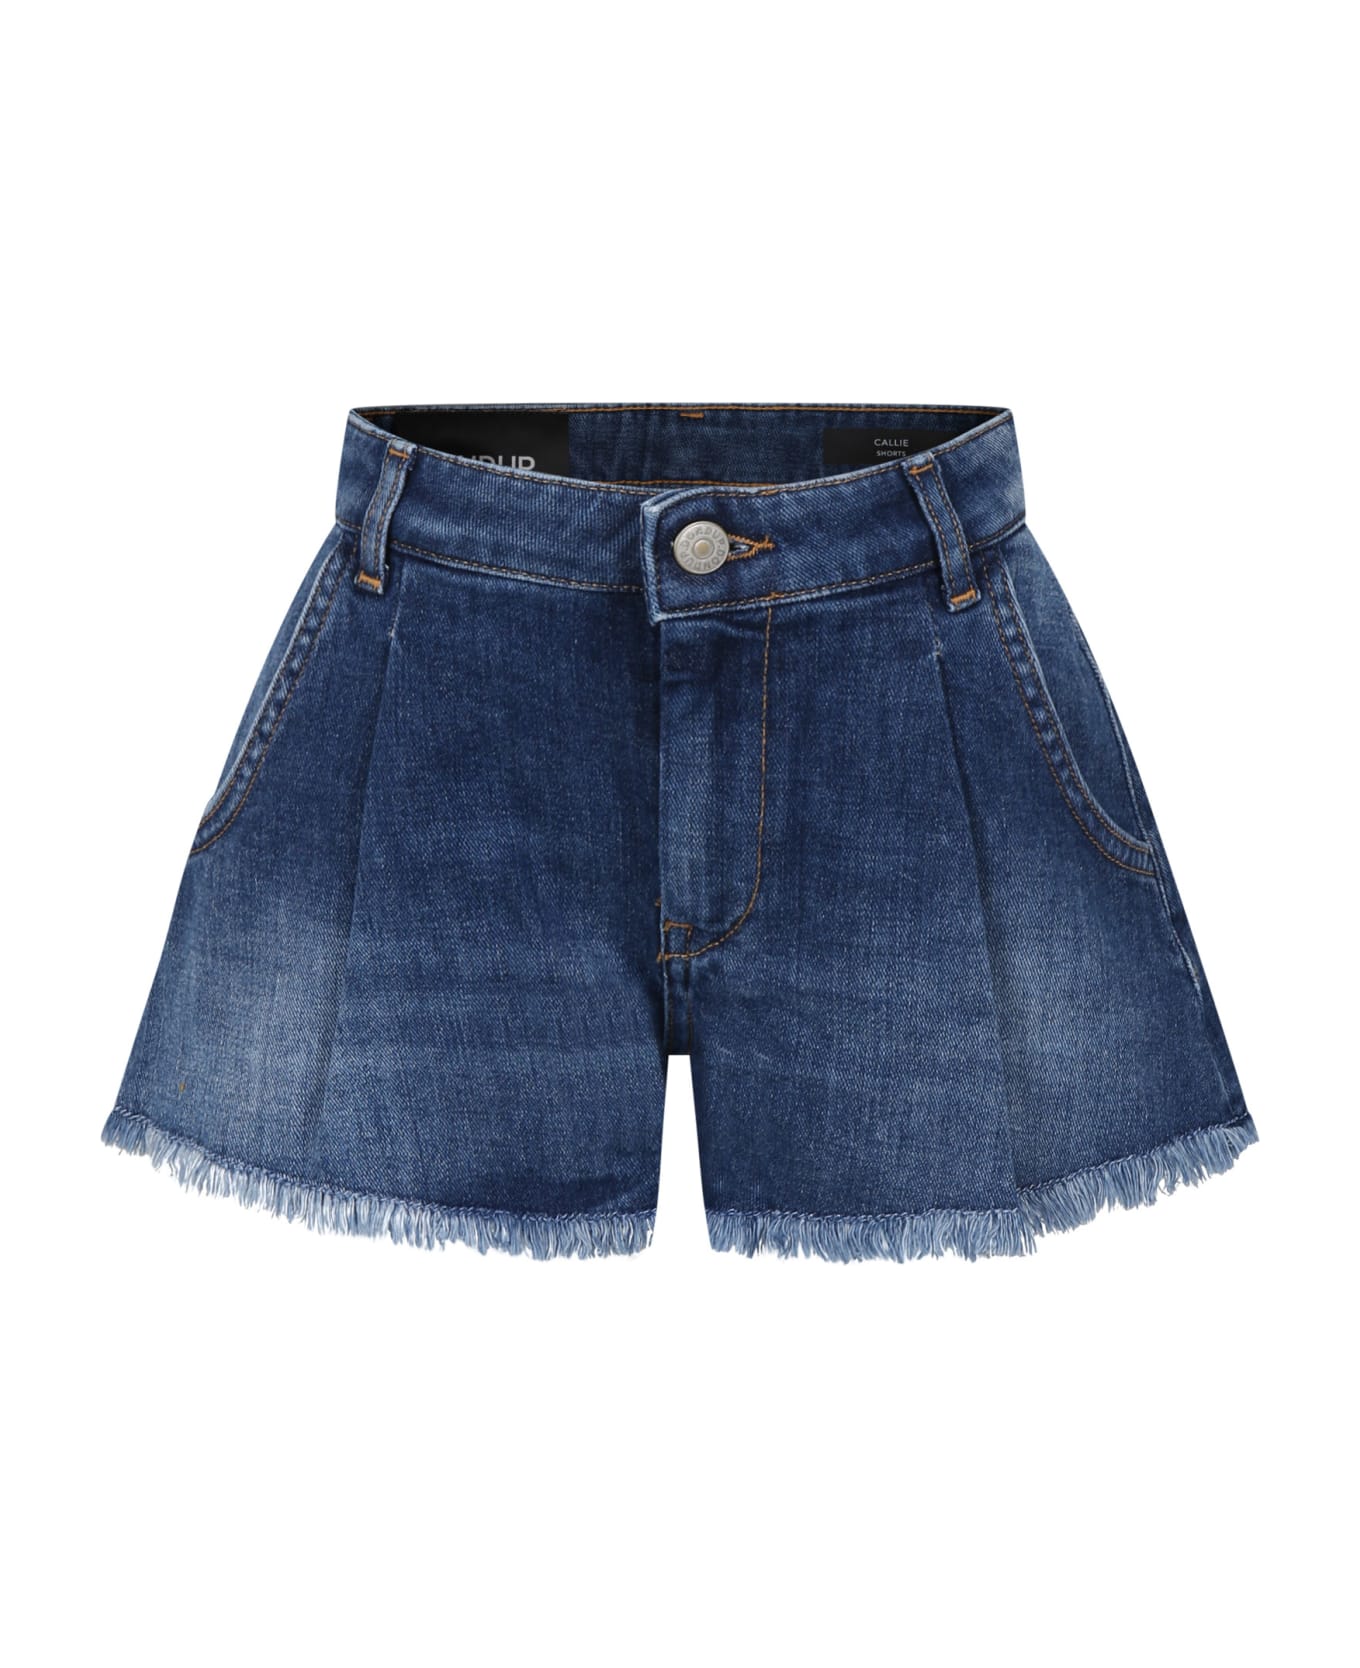 Dondup Blue Shorts For Girl With Logo - Denim ボトムス